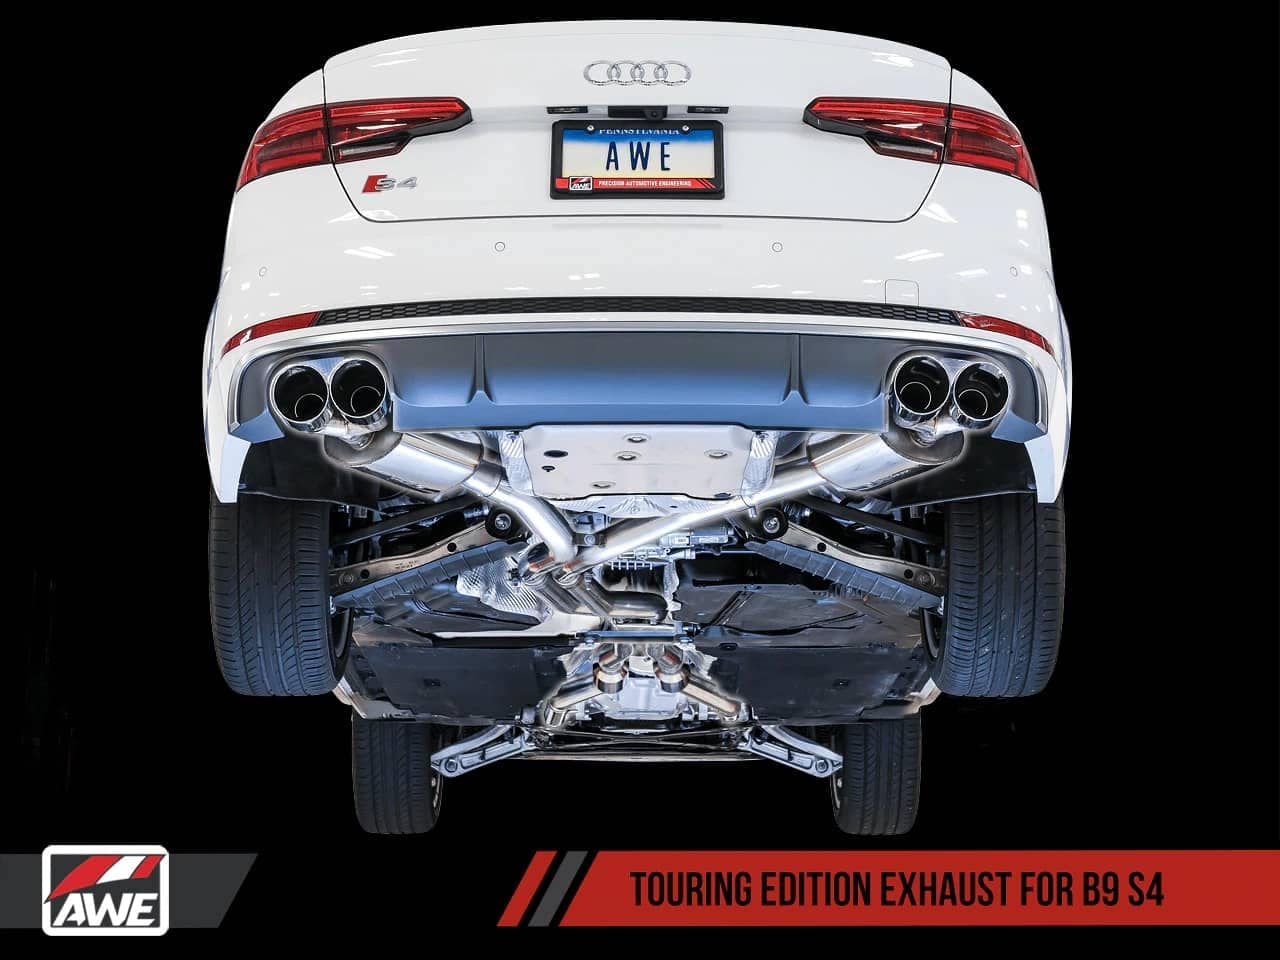 Touring Edition exhaust